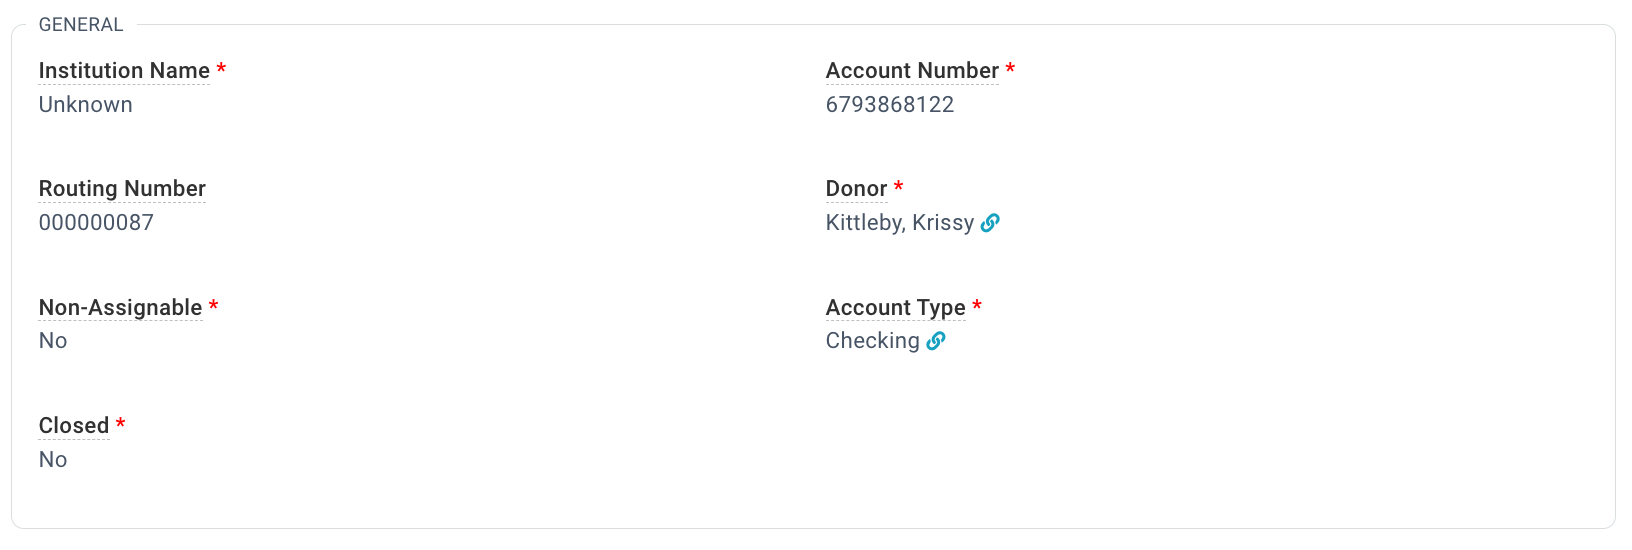 Donor account fields.